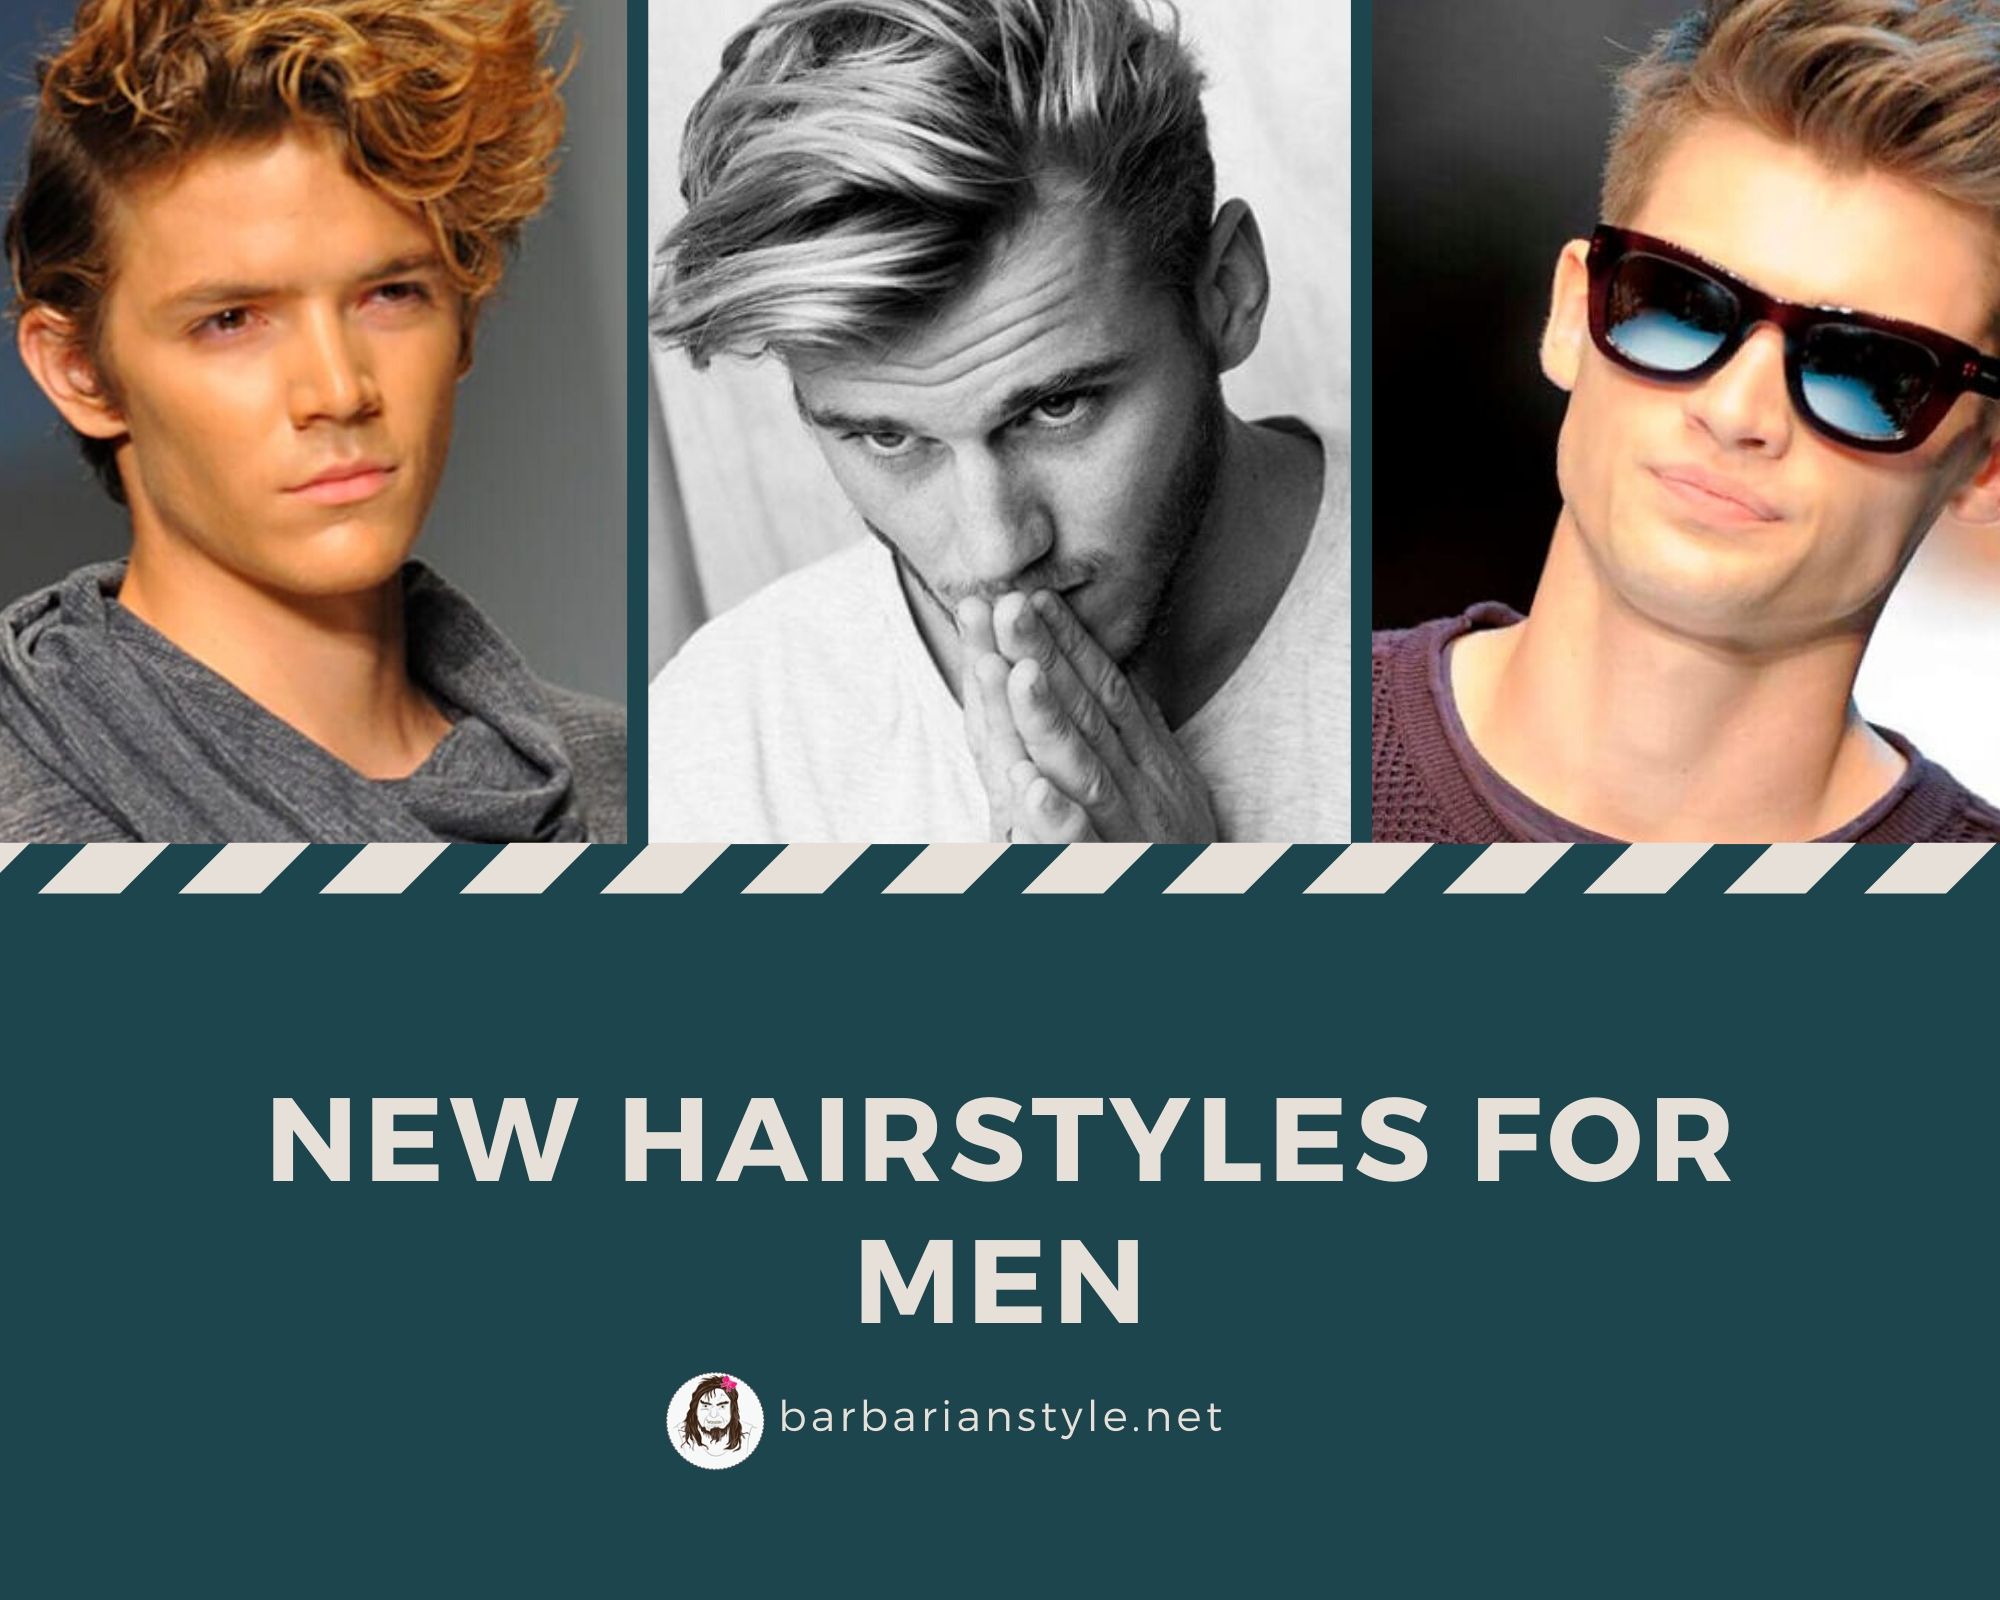 New Hairstyles for Men - Men's Haircuts Ideas in 2021.